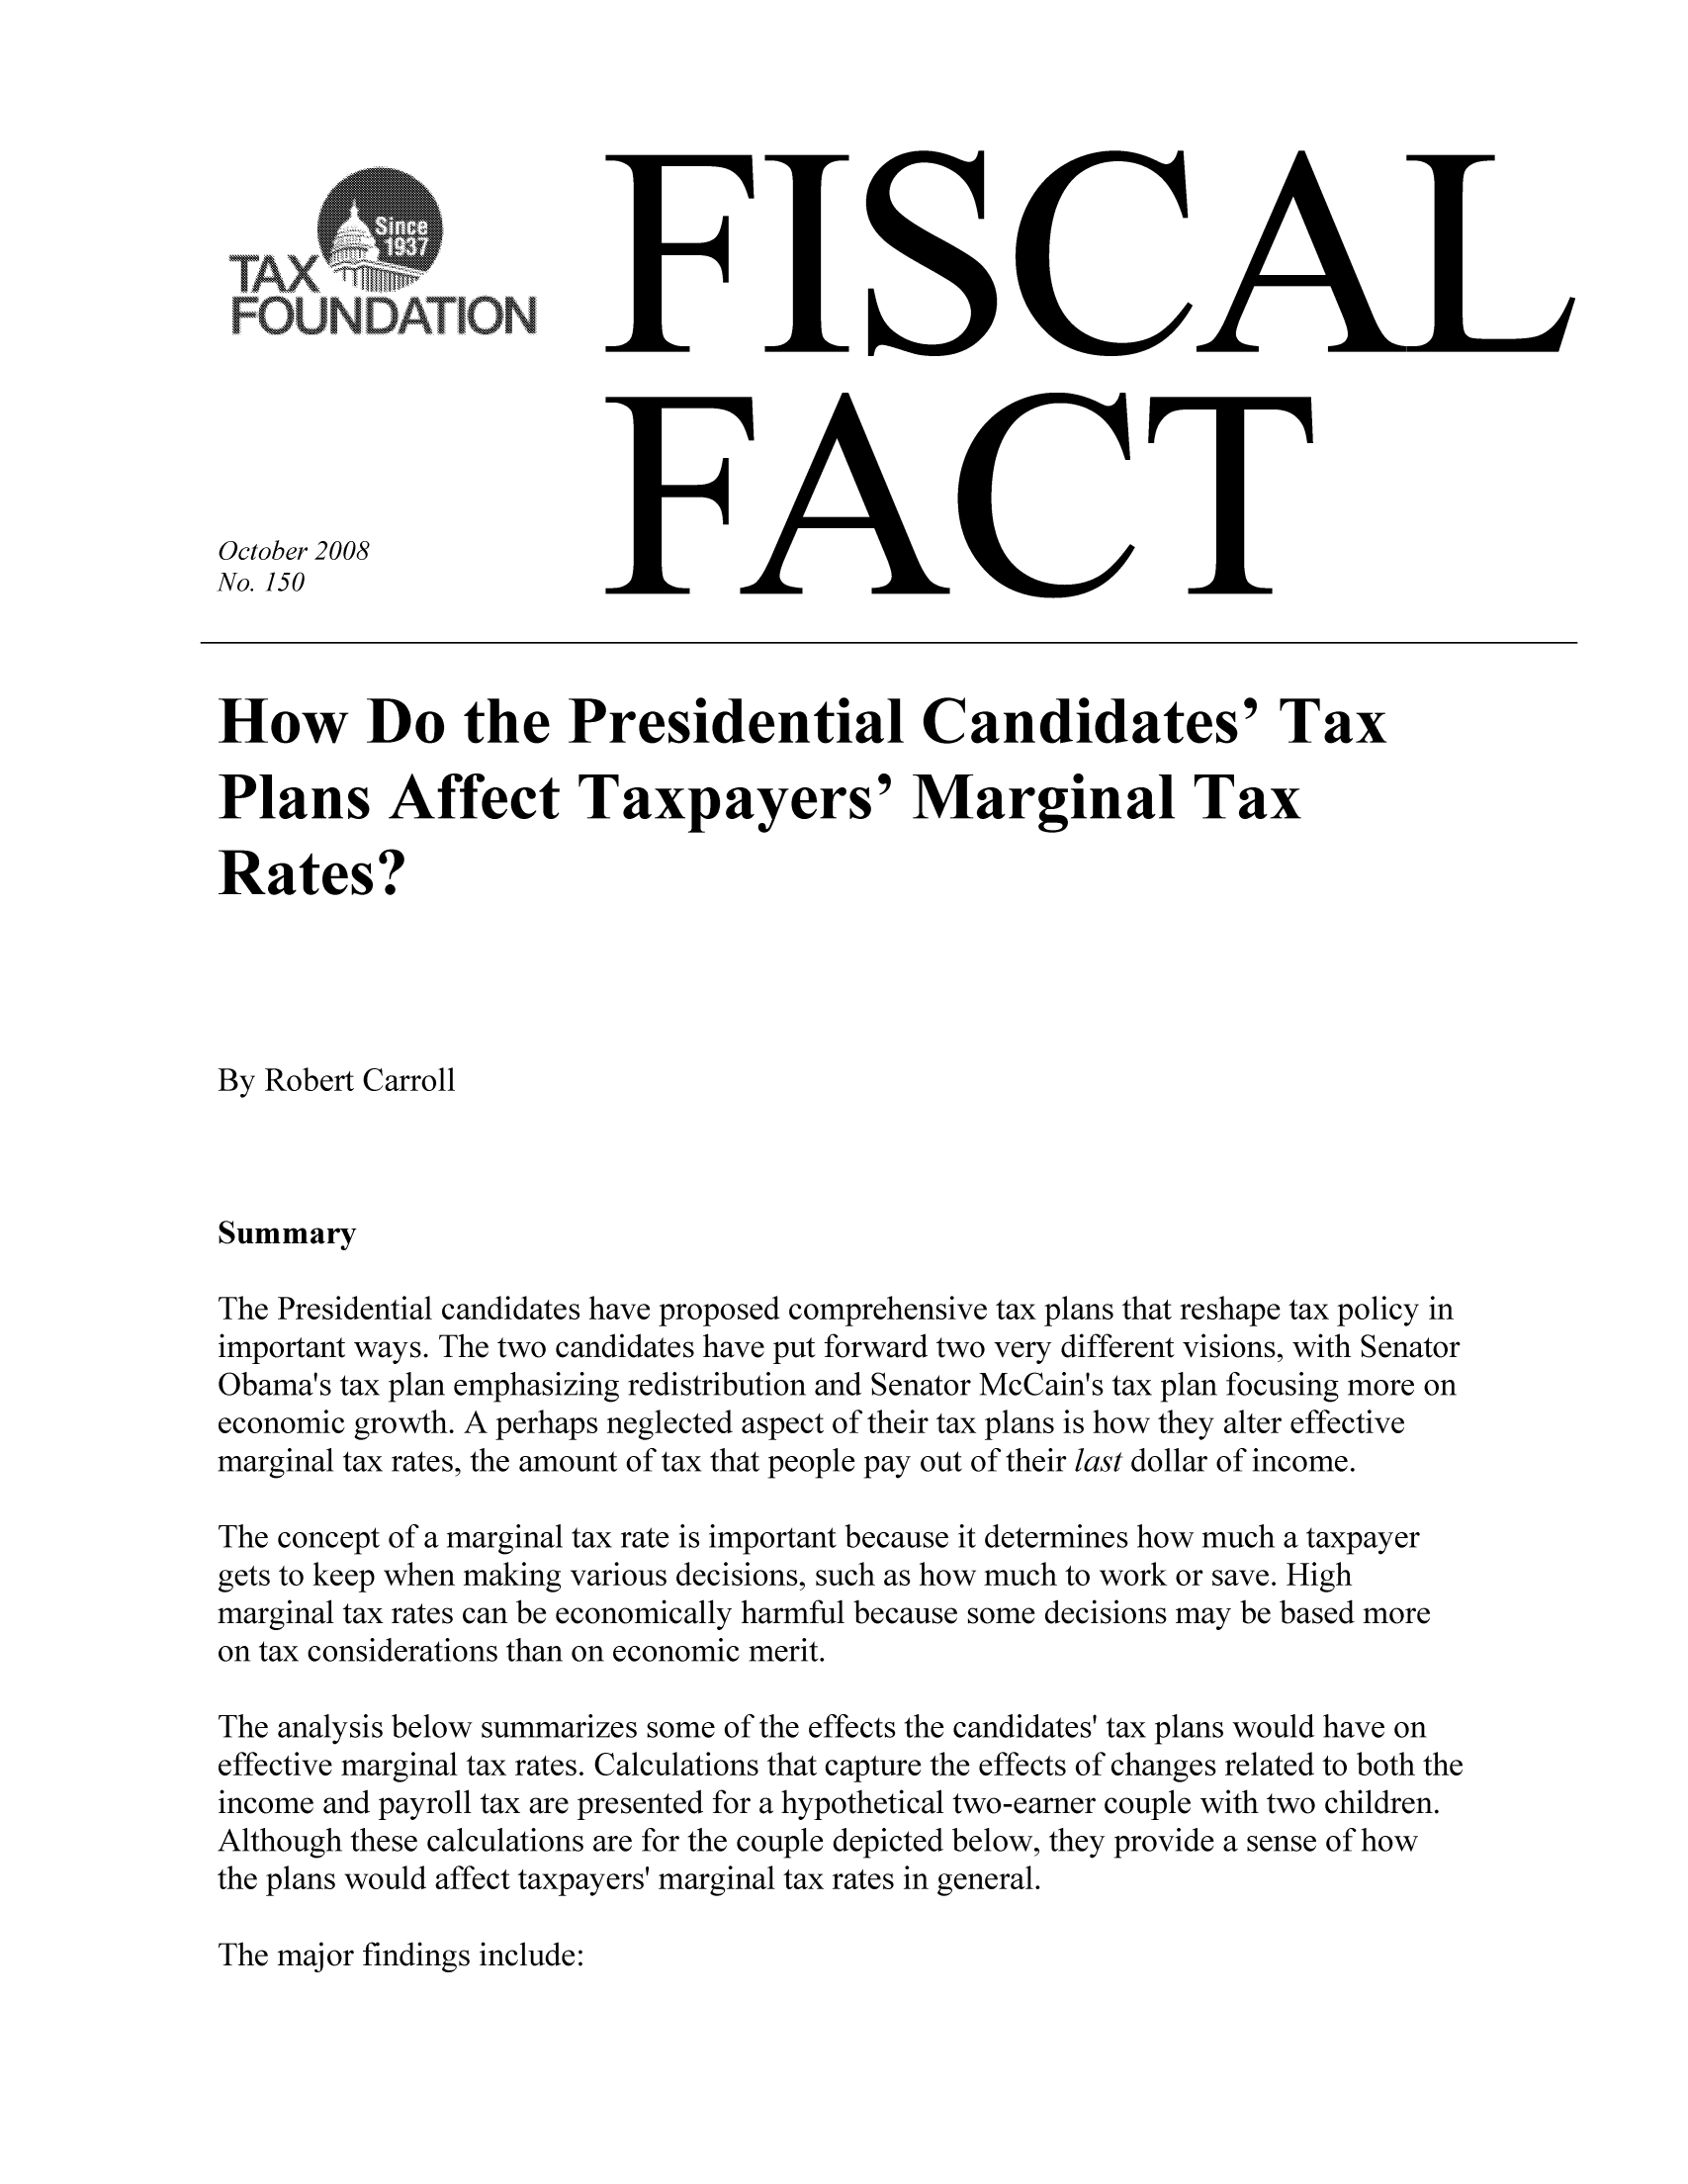 handle is hein.taxfoundation/ffbfaxz0001 and id is 1 raw text is: FISCAL

FACT

October 2008
No. 150

How Do the Presidential Candidates' Tax
Plans Affect Taxpayers' Marginal Tax
Rates?
By Robert Carroll
Summary
The Presidential candidates have proposed comprehensive tax plans that reshape tax policy in
important ways. The two candidates have put forward two very different visions, with Senator
Obama's tax plan emphasizing redistribution and Senator McCain's tax plan focusing more on
economic growth. A perhaps neglected aspect of their tax plans is how they alter effective
marginal tax rates, the amount of tax that people pay out of their last dollar of income.
The concept of a marginal tax rate is important because it determines how much a taxpayer
gets to keep when making various decisions, such as how much to work or save. High
marginal tax rates can be economically harmful because some decisions may be based more
on tax considerations than on economic merit.
The analysis below summarizes some of the effects the candidates' tax plans would have on
effective marginal tax rates. Calculations that capture the effects of changes related to both the
income and payroll tax are presented for a hypothetical two-earner couple with two children.
Although these calculations are for the couple depicted below, they provide a sense of how
the plans would affect taxpayers' marginal tax rates in general.

The major findings include:

- - - - - - - - - - - - - - - -
as
RL              M, a
FOUNDATION:


